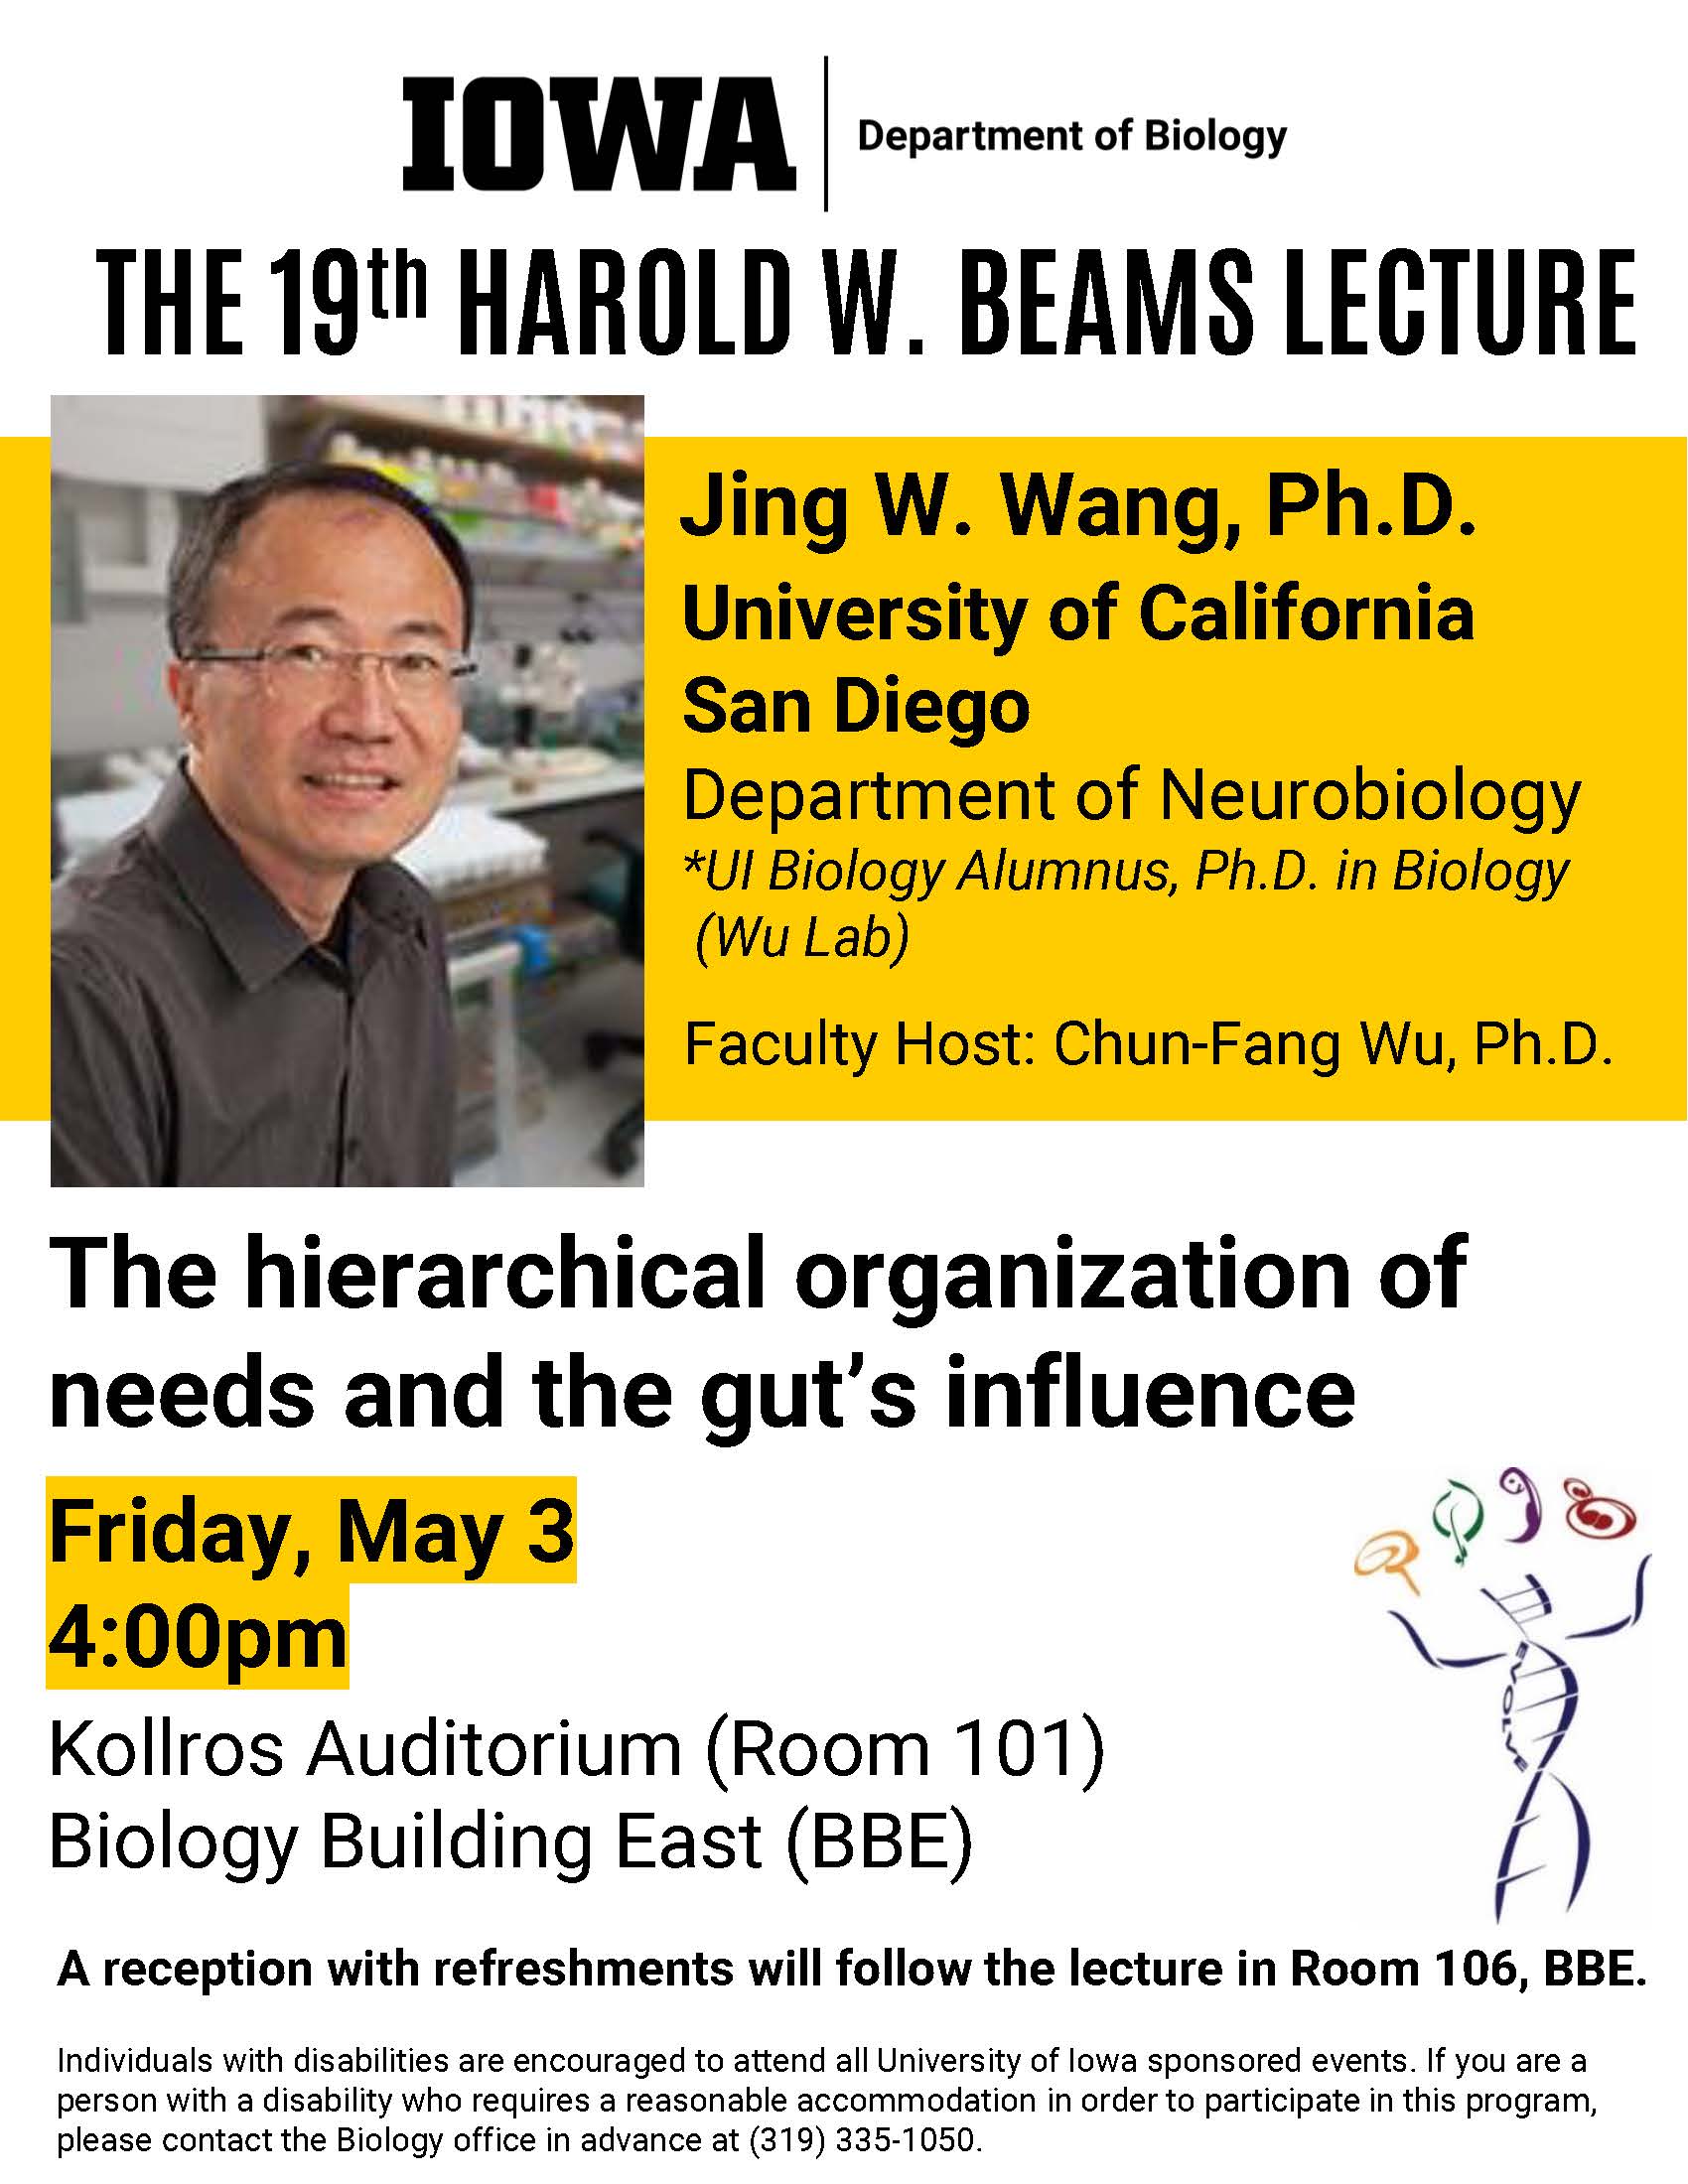 The 19th Harold W. Beams Lecture will be held on Friday, May 3 at 4pm in Kollros Auditorium (Room 101), Biology Building East. Our speaker for this special lecture is Jing W. Wang from UC San Diego. 